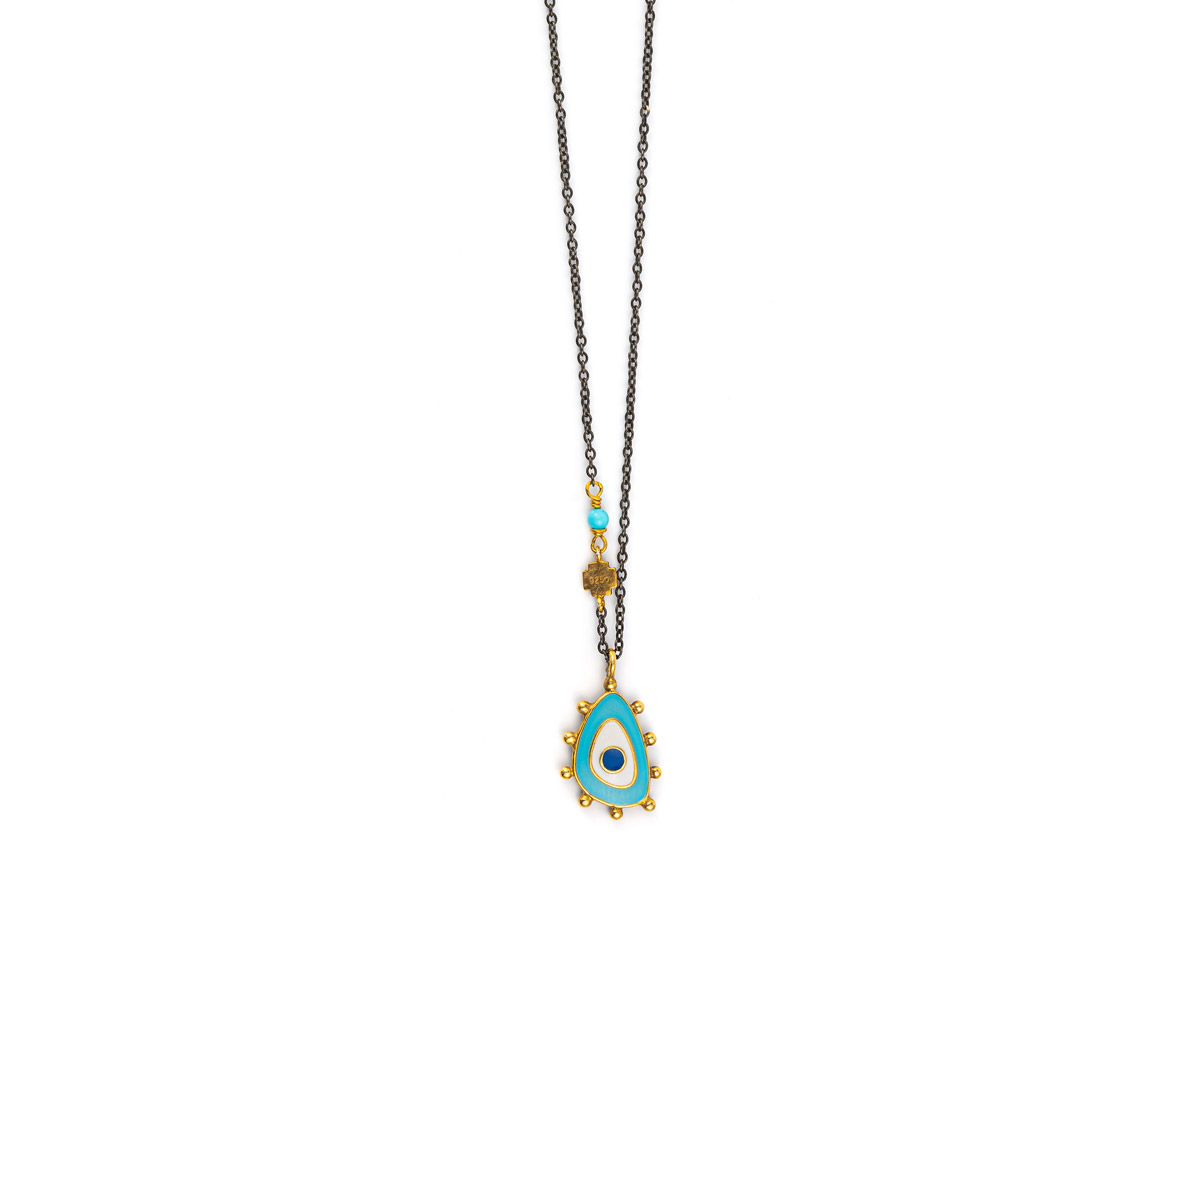 Sterling silver Eye necklace with hanging enamel